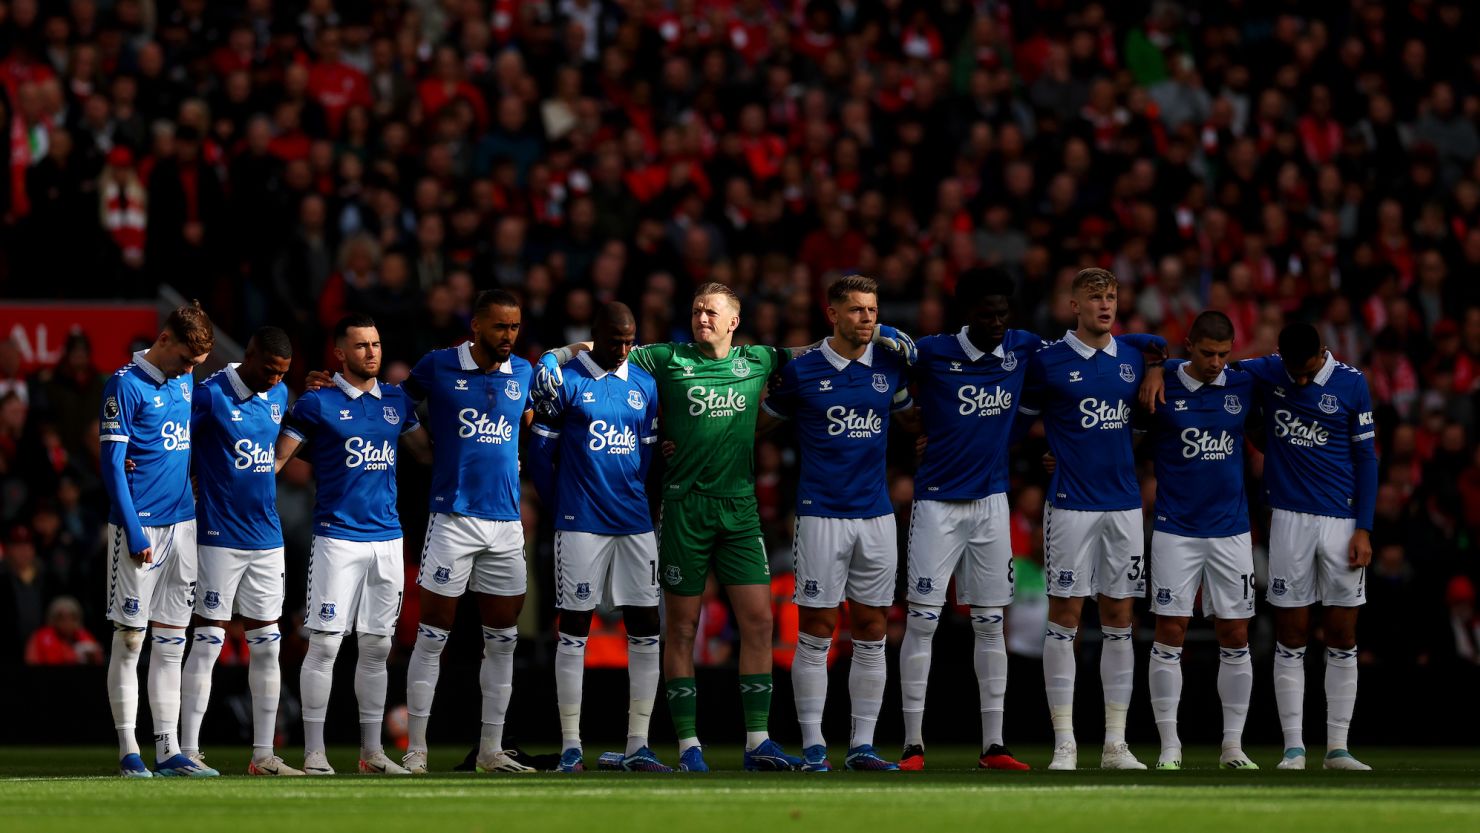 Everton deducted 10 points for breaching English Premier League rules | CNN